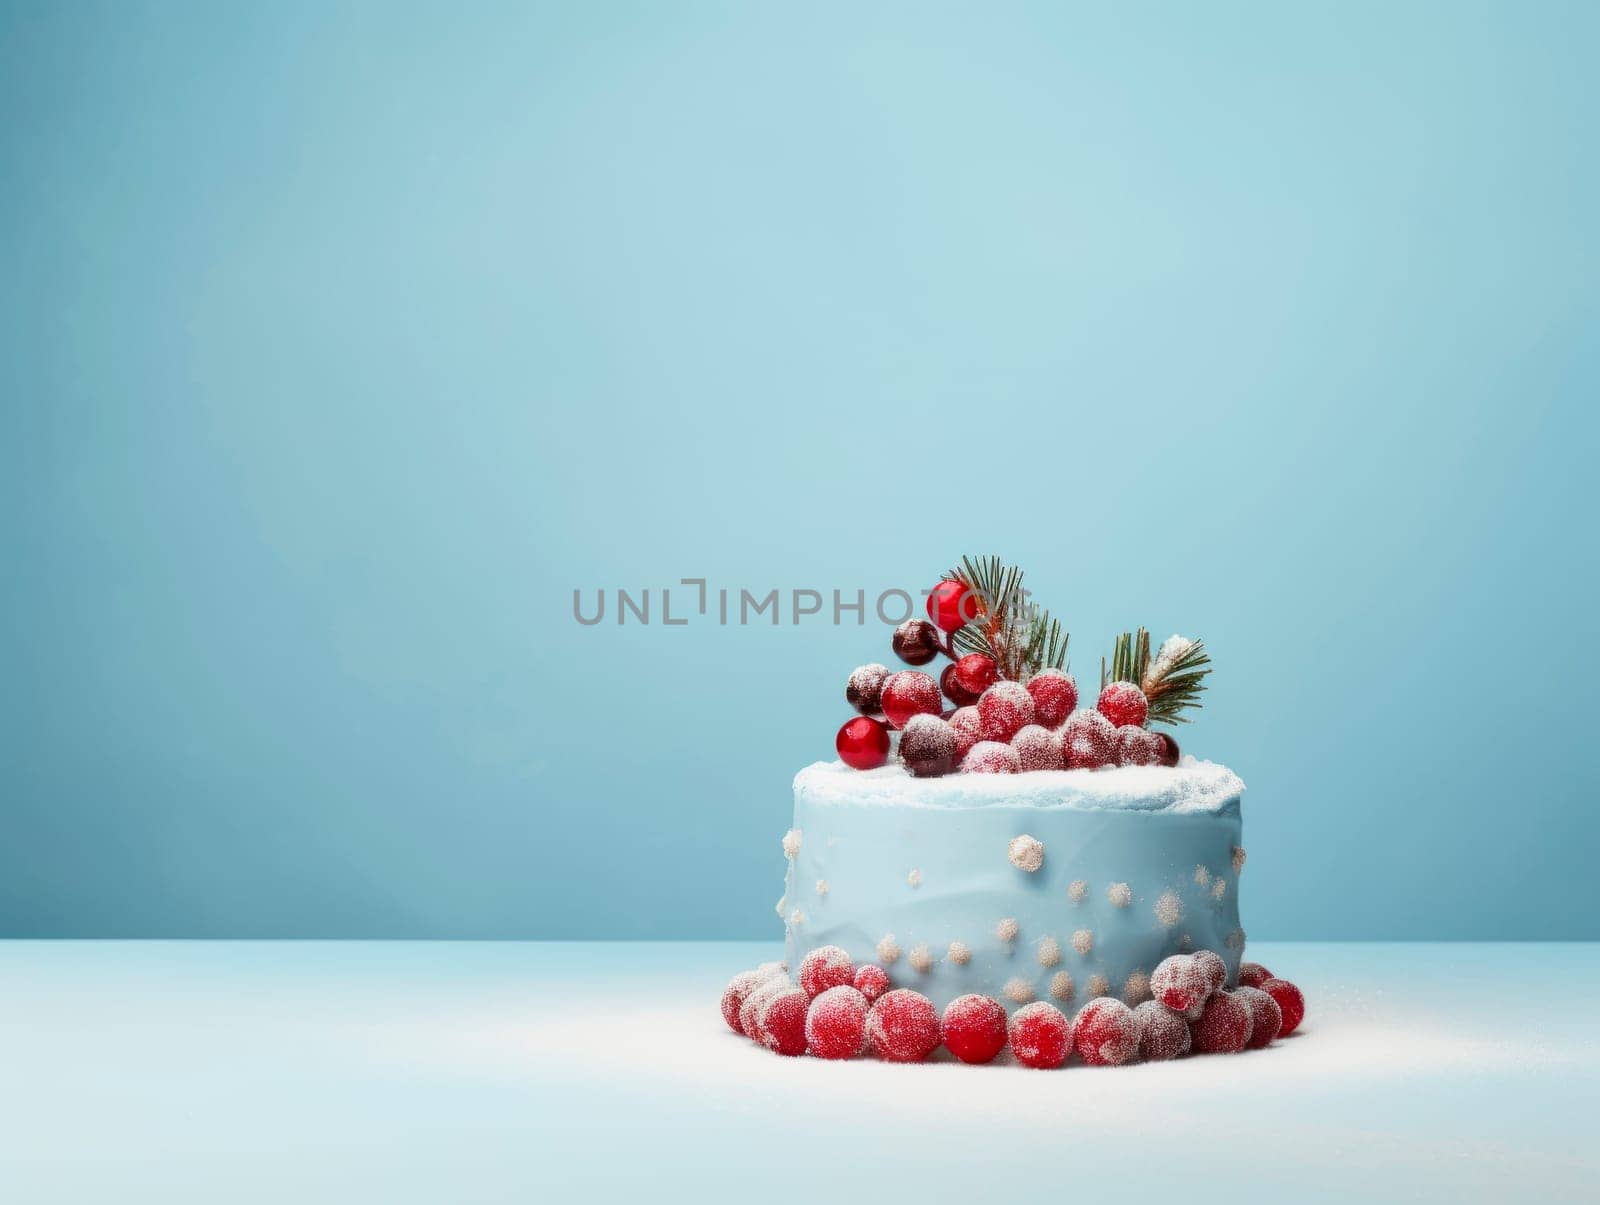 Beautiful Christmas cake decorated with berries. Blue background. Christmas dessert.